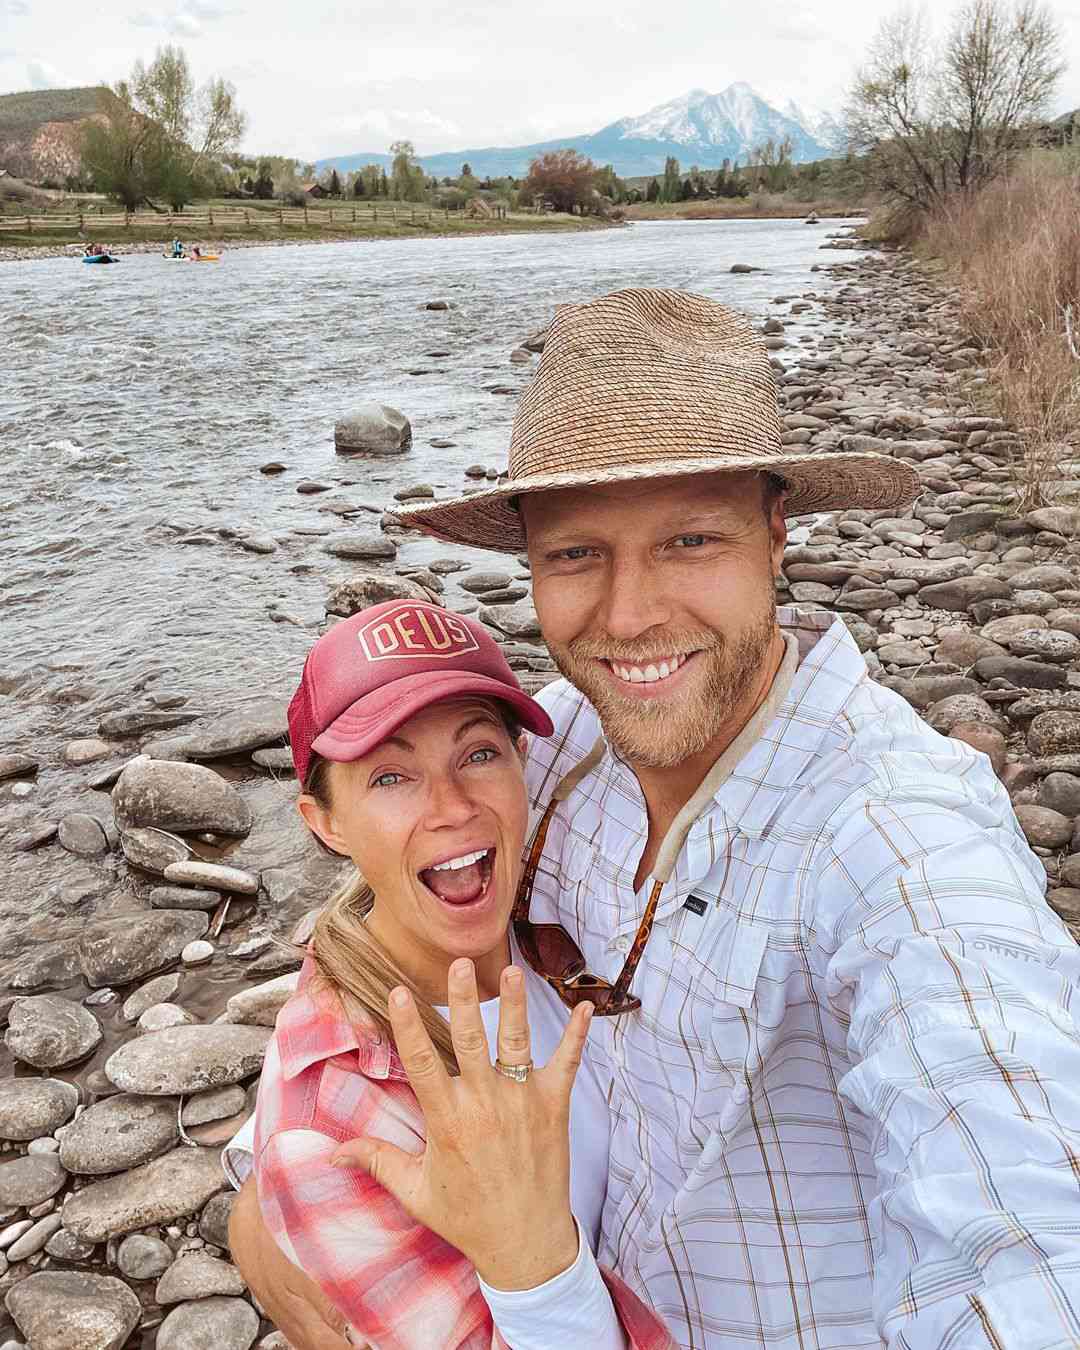 The Bachelor’s Sarah Herron Is Engaged to Dylan Brown After 4 Years Together